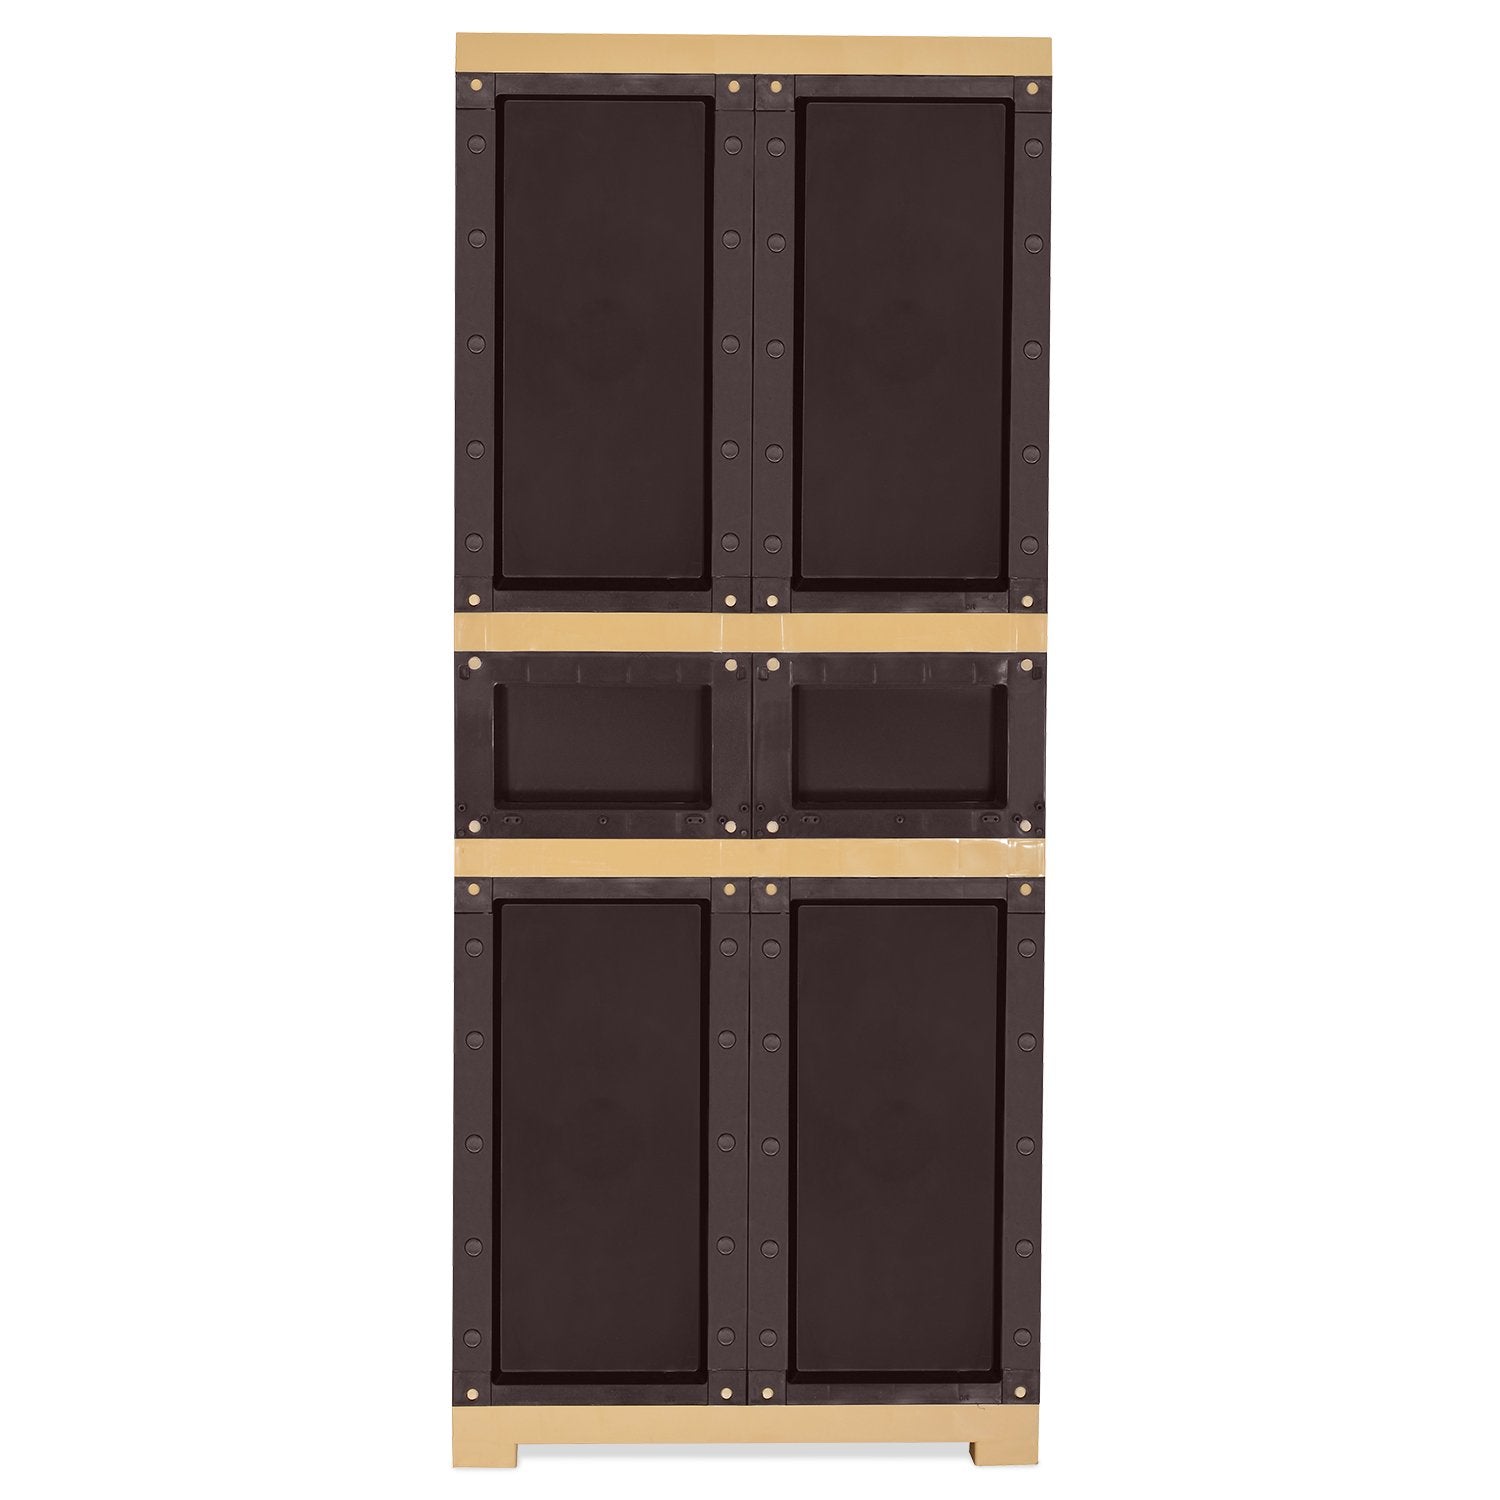 Nilkamal Freedom FMDR 1C Plastic Storage Cabinet with 1 Drawer (Weathered Brown & Biscuit)